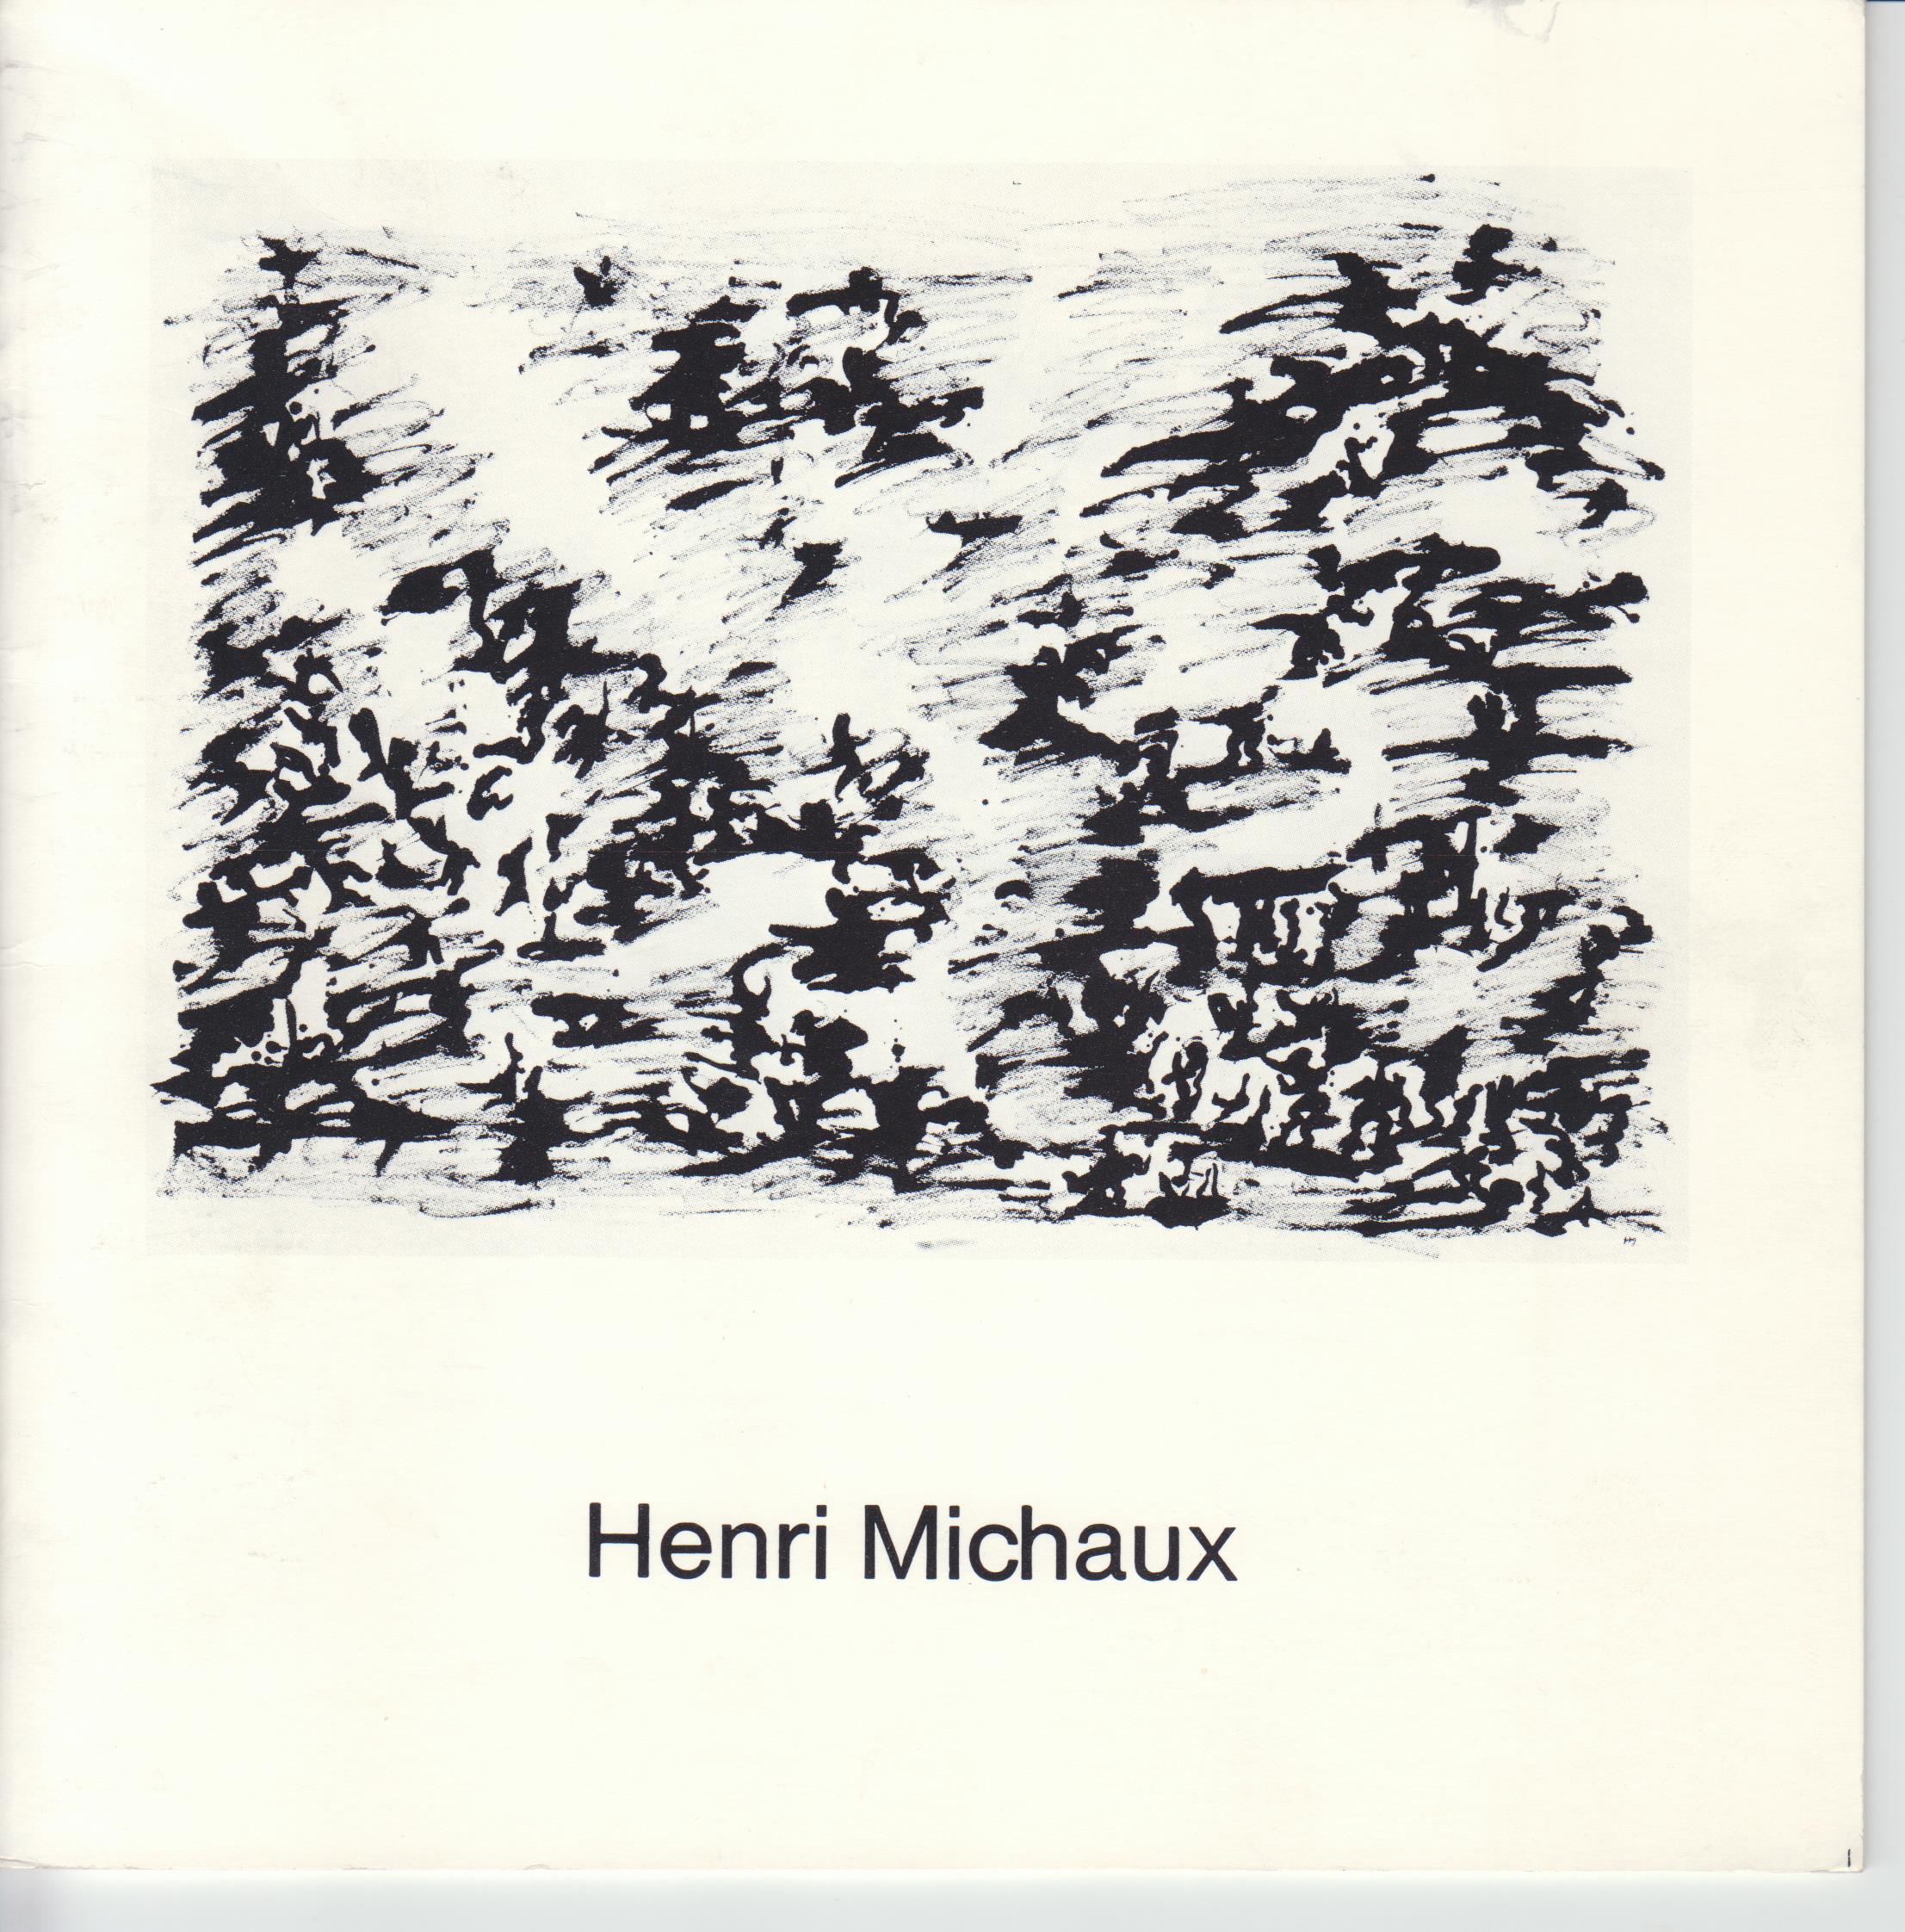 Selected Writings by Henri Michaux